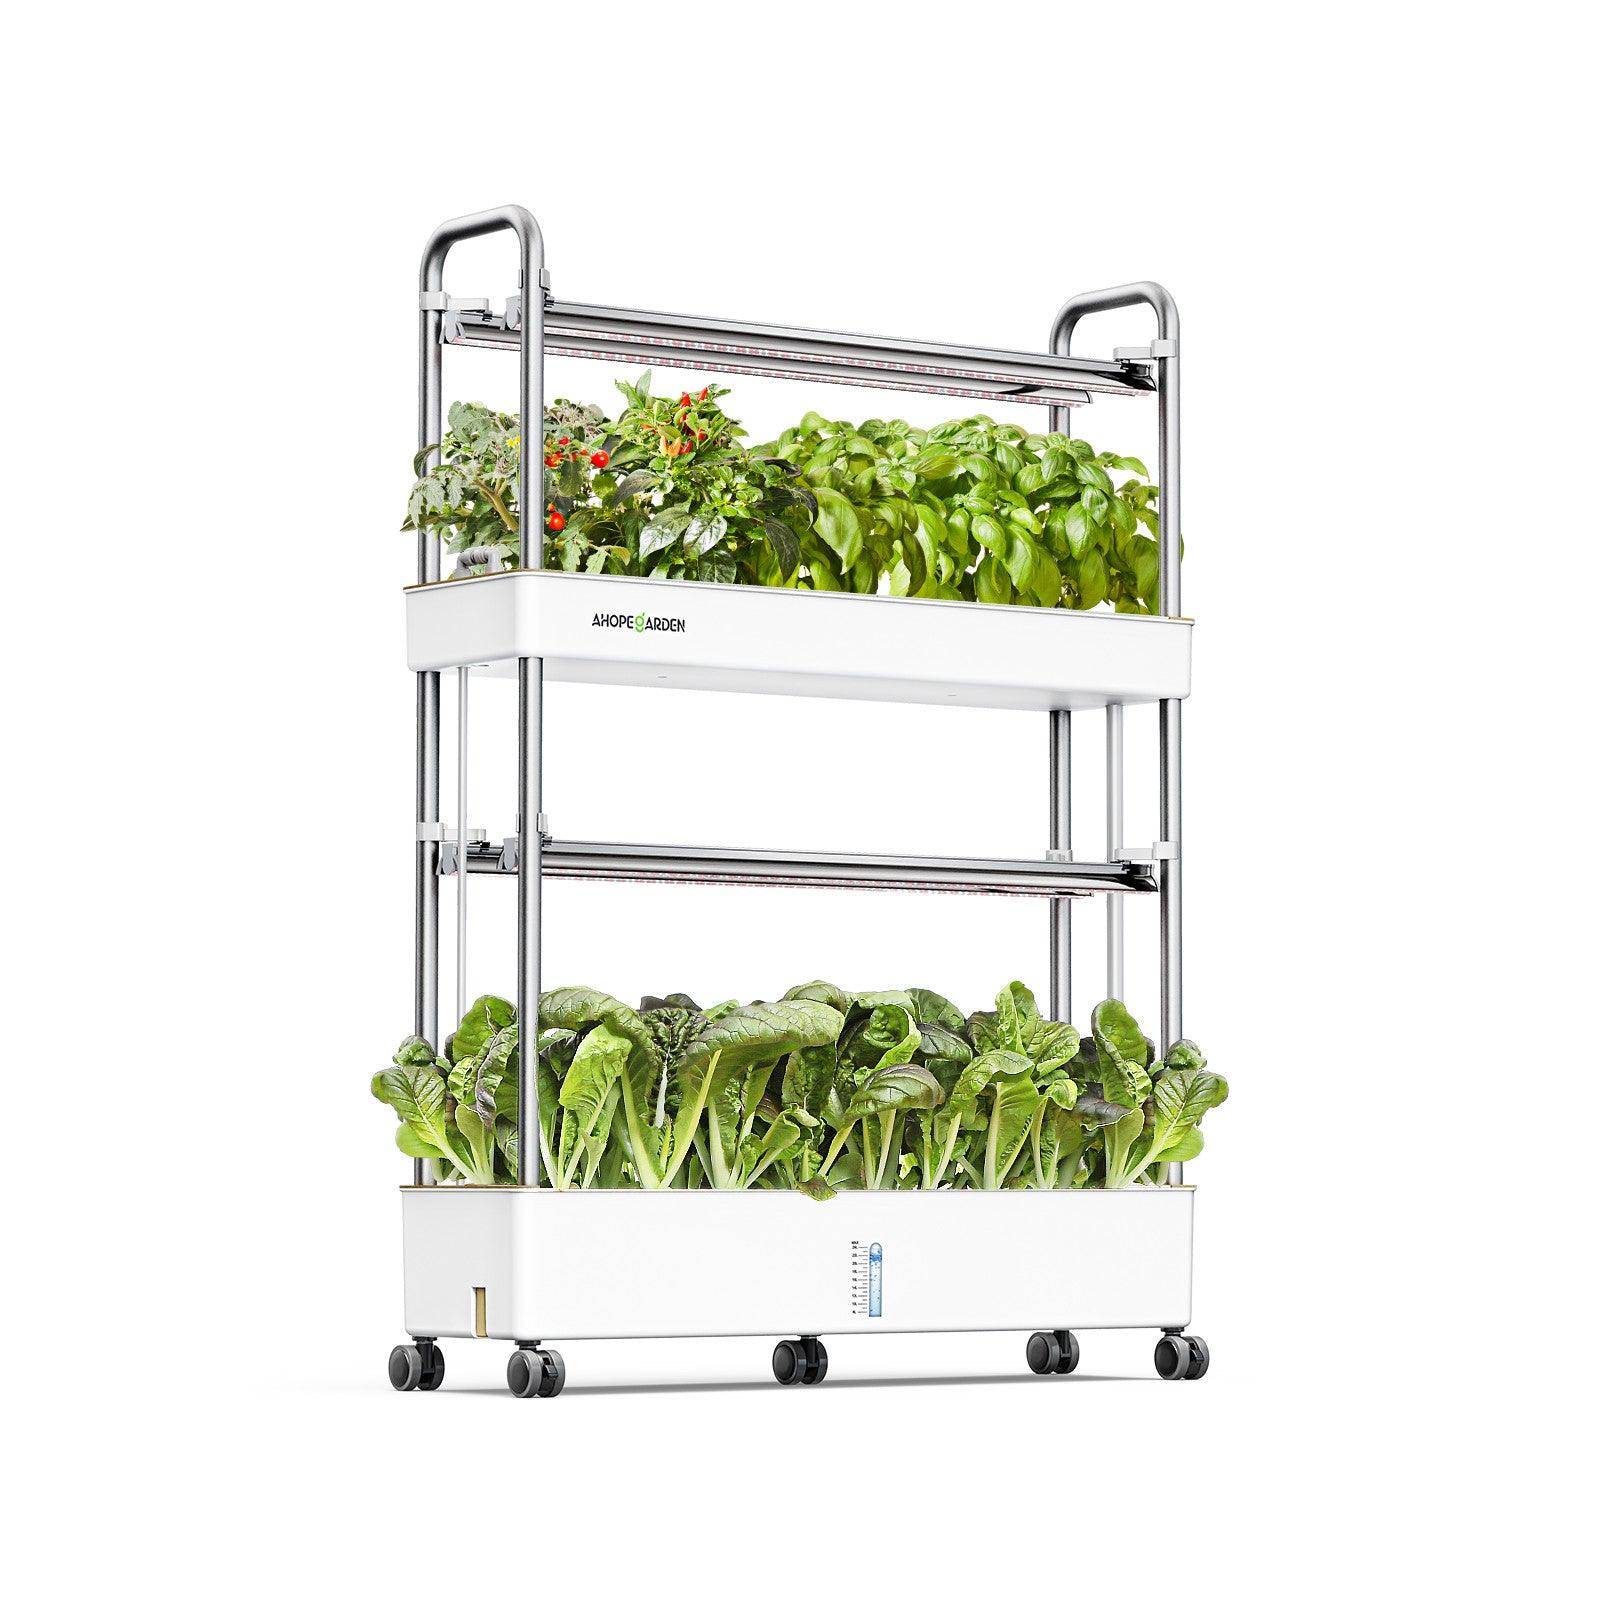 Ahope 60 Seed Pods 60 Vertical Hydroponic Garden Side View